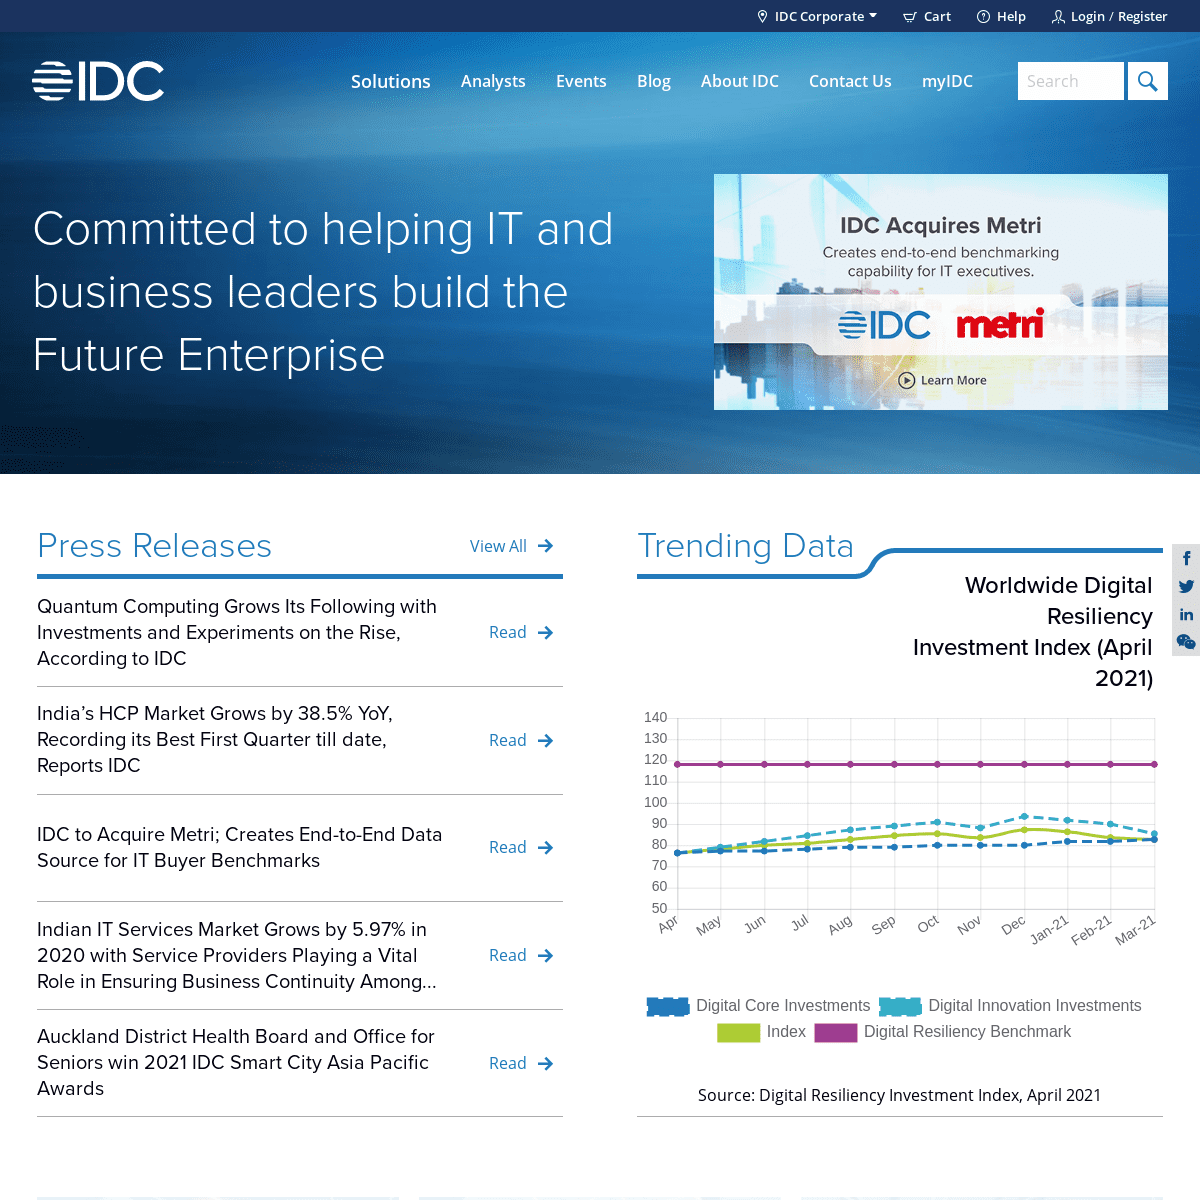 A complete backup of https://www.idc.com/